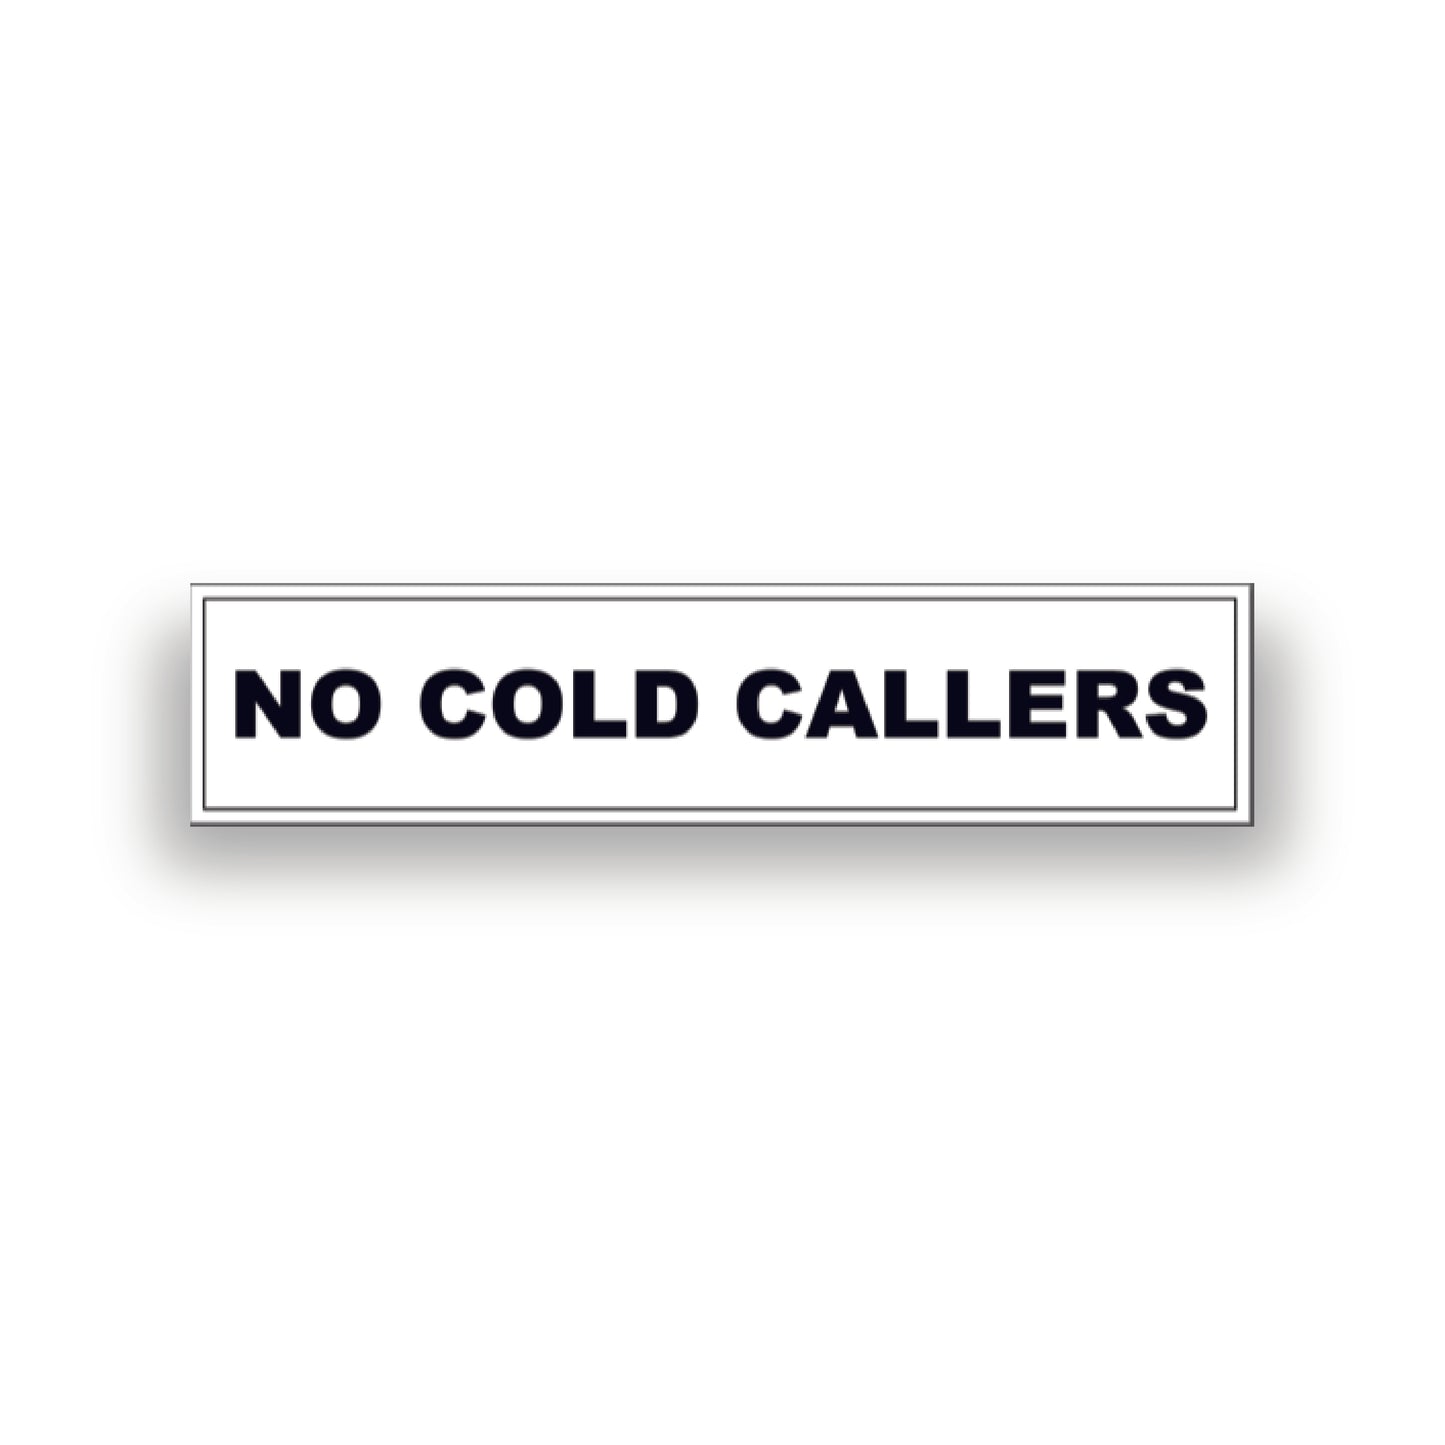 No Junk Mail, No Cold Callers, No Leaflets, Letterbox, Junk, Stickers, Sign,Door